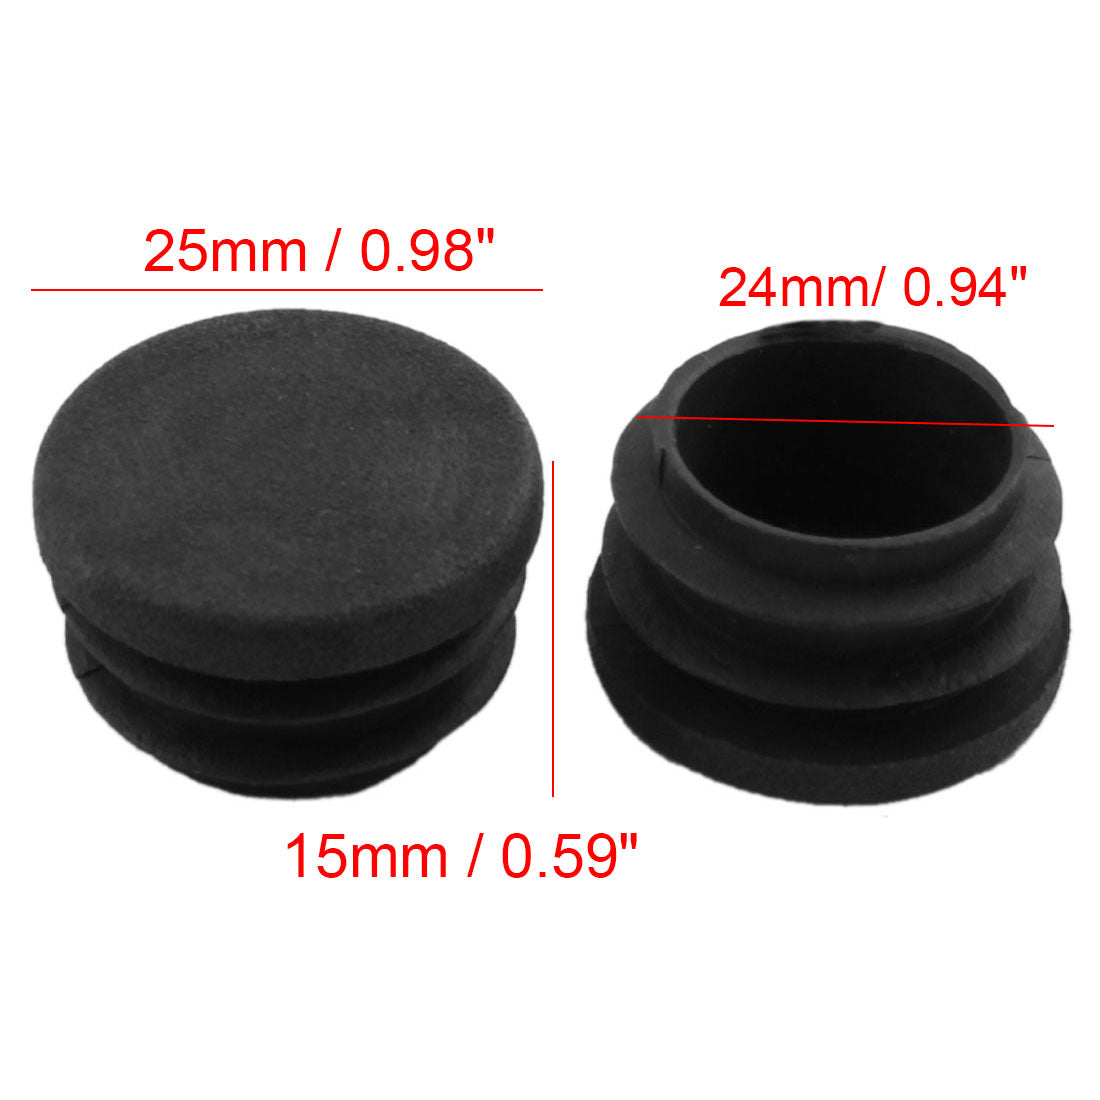 uxcell Uxcell Chair Table Legs 25mm Diameter Plastic Cap Round Tube Insert 15 Pcs